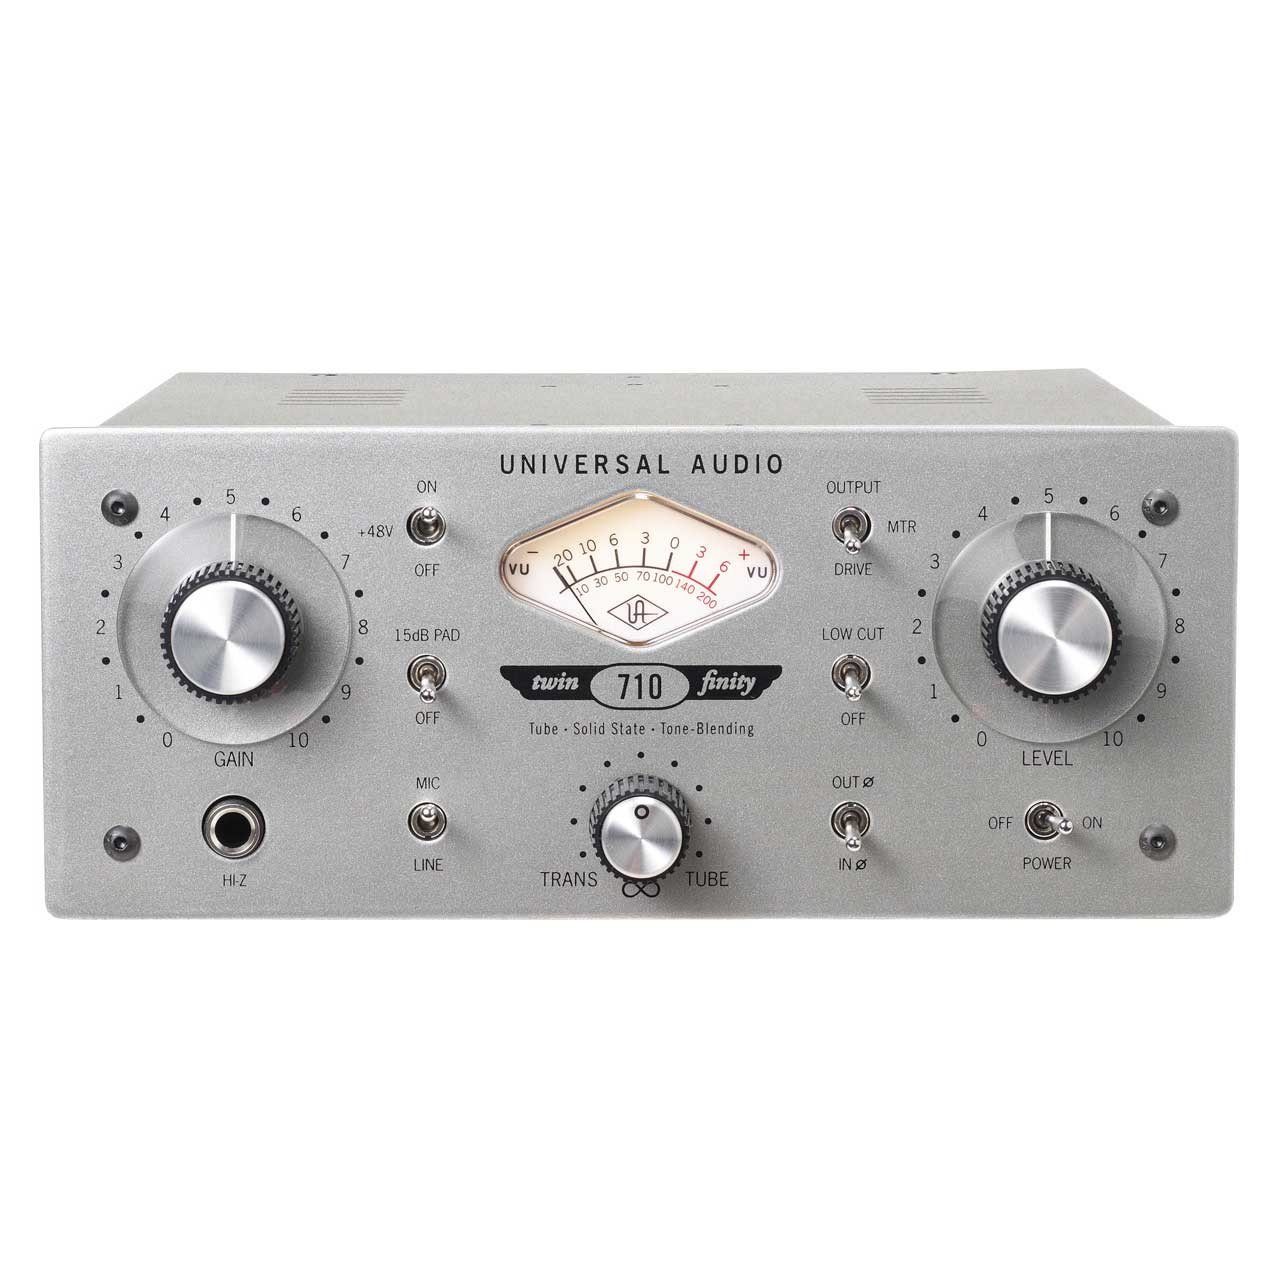 Preamps/Channel Strips - Universal Audio 710 Twin-Finity Mic Preamp & D.I.